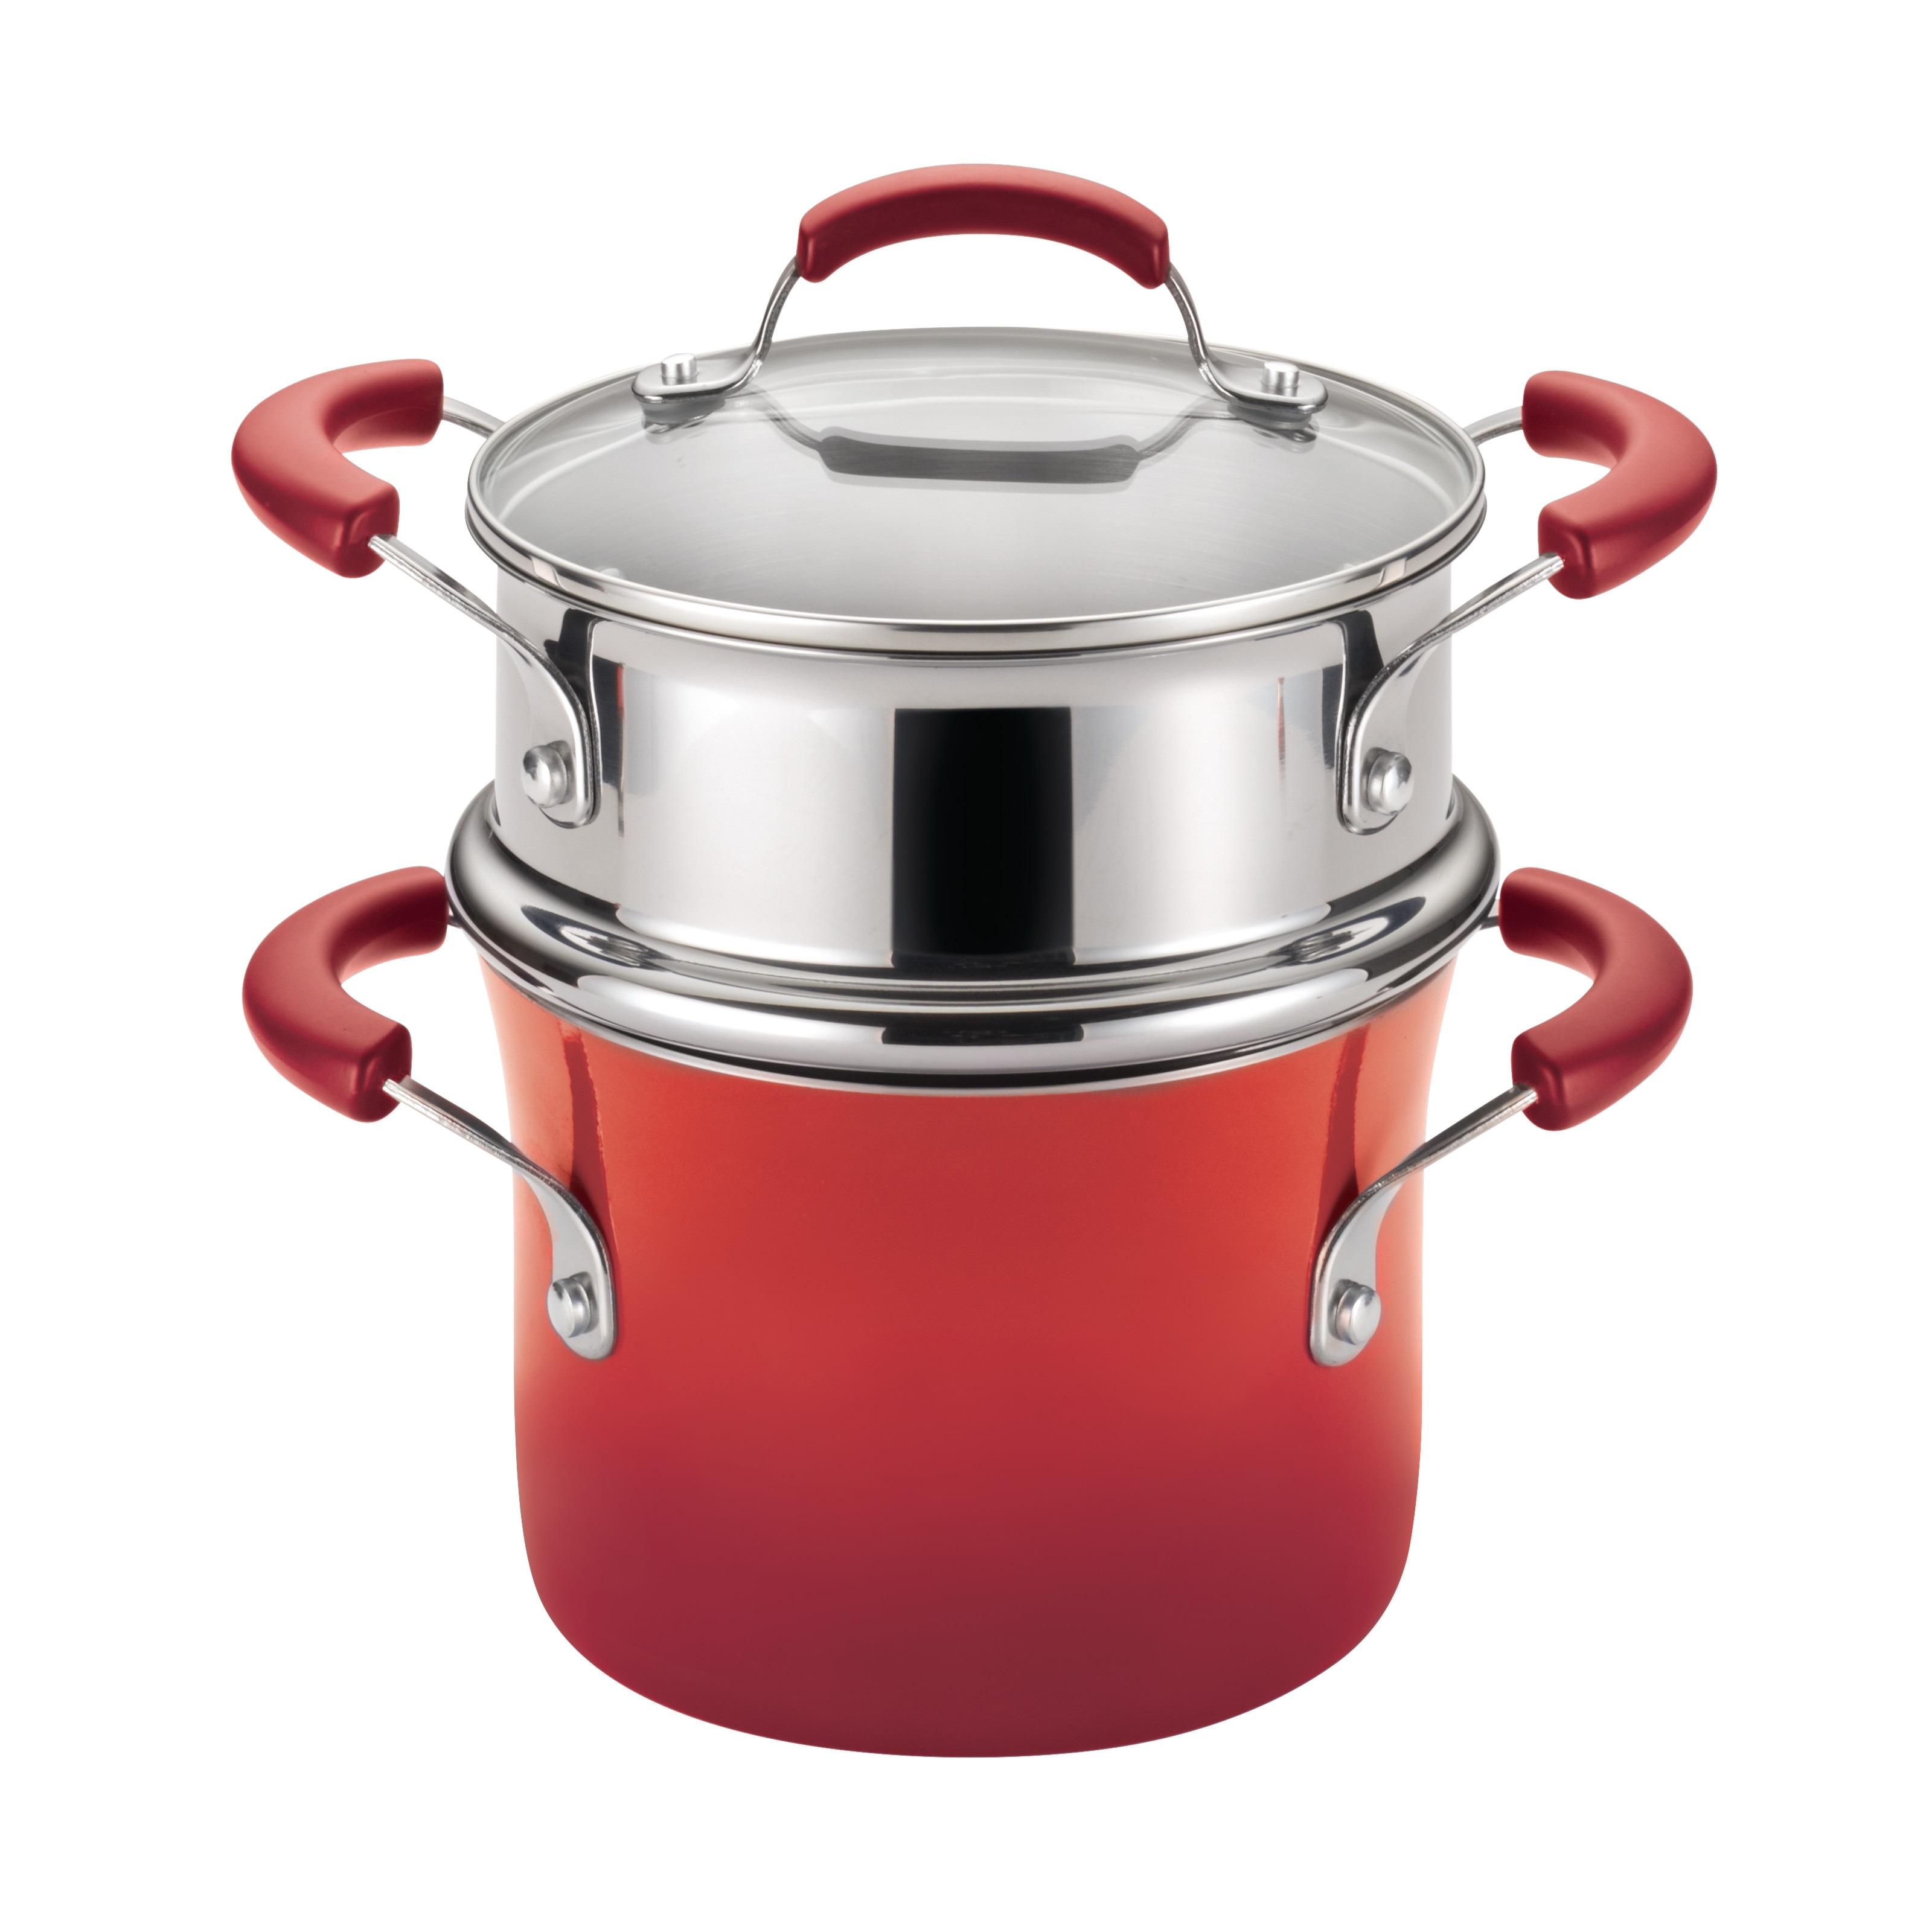 https://ak1.ostkcdn.com/images/products/is/images/direct/411aa902cbaad5c4c08b8ce6bcb9231359c59b17/Rachael-Ray-Classic-Brights-Hard-Enamel-Nonstick-Sauce-Pot-and-Steamer-Insert-Set-with-Lid%2C-3-Quart%2C-Red-Gradient.jpg